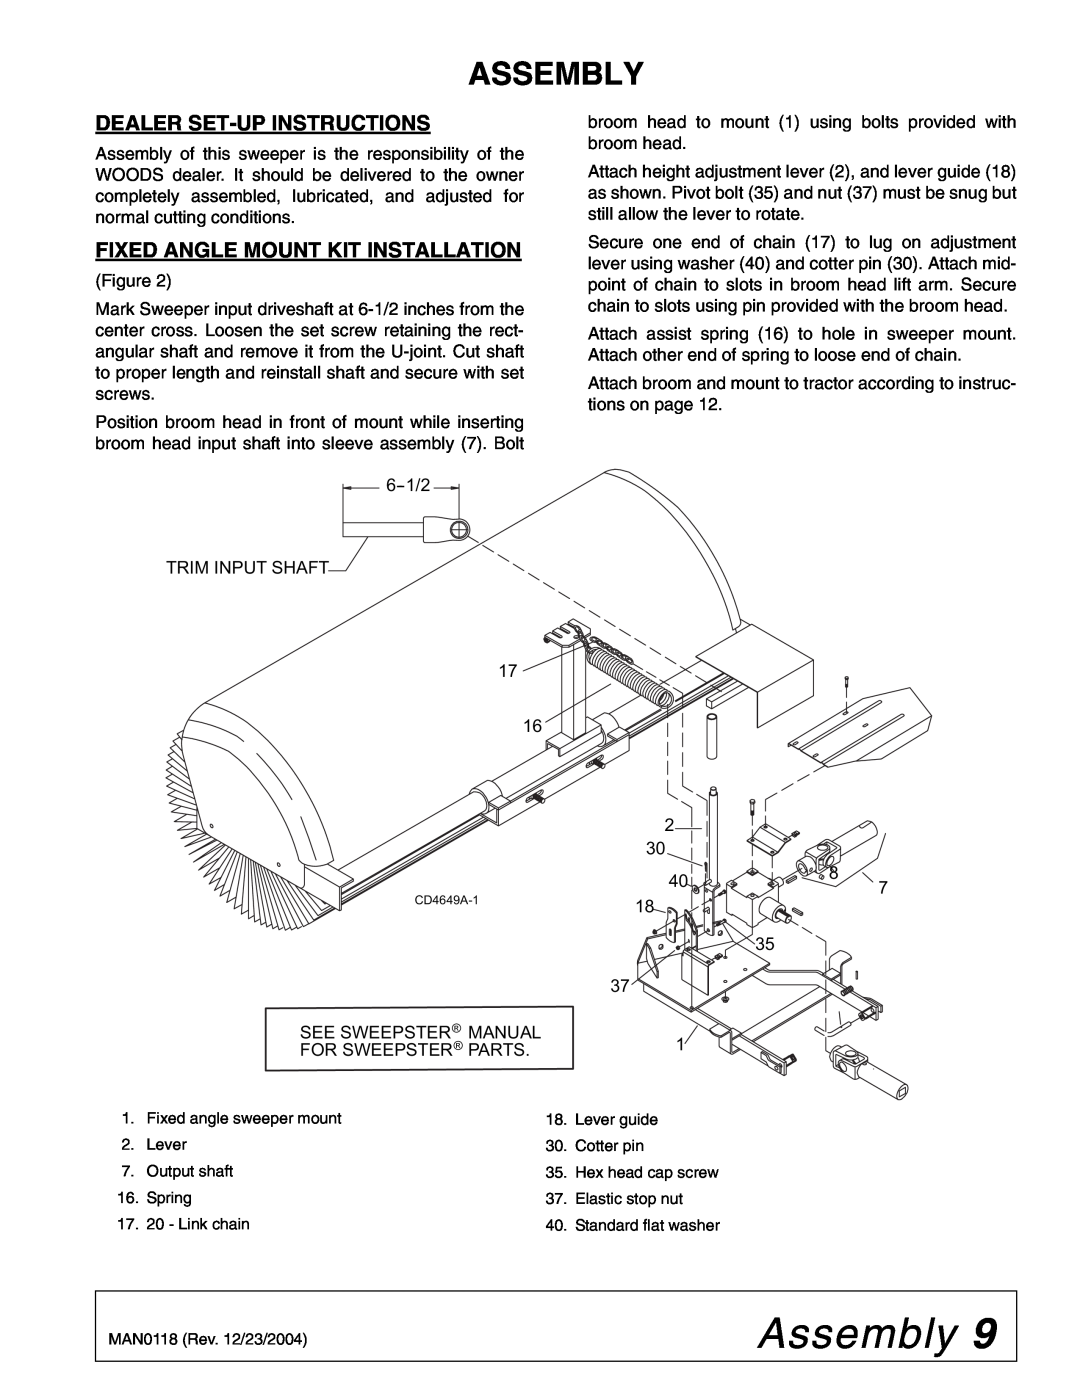 Woods Equipment FSW6000F, FSW6000T manual Assembly, Dealer Set-Up Instructions, Fixed Angle Mount Kit Installation 